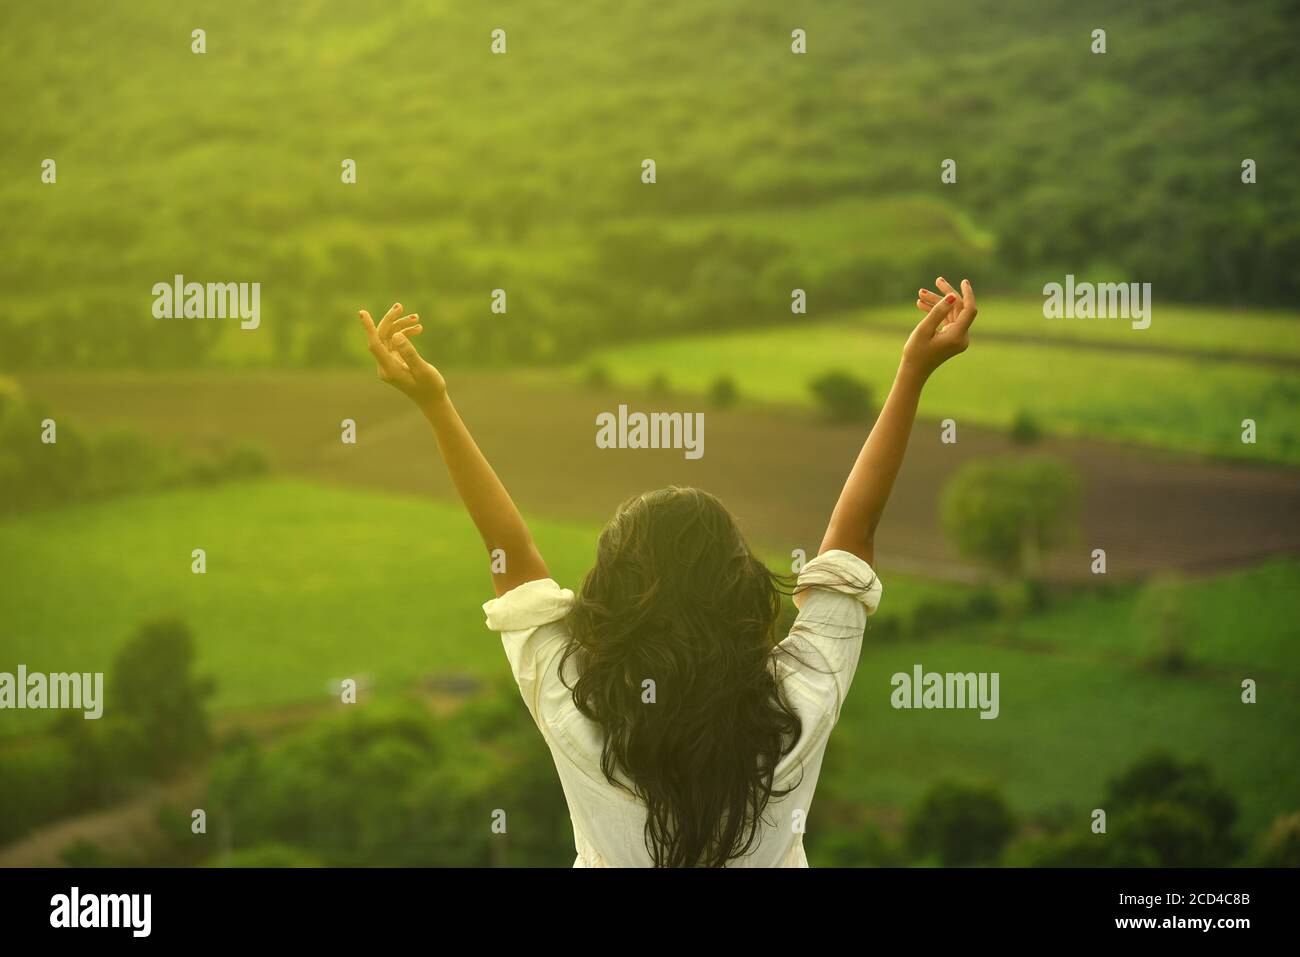 Happy celebrating winning success woman at sunset or sunrise standing elated with arms raised up above her head in celebration of having reached mount Stock Photo